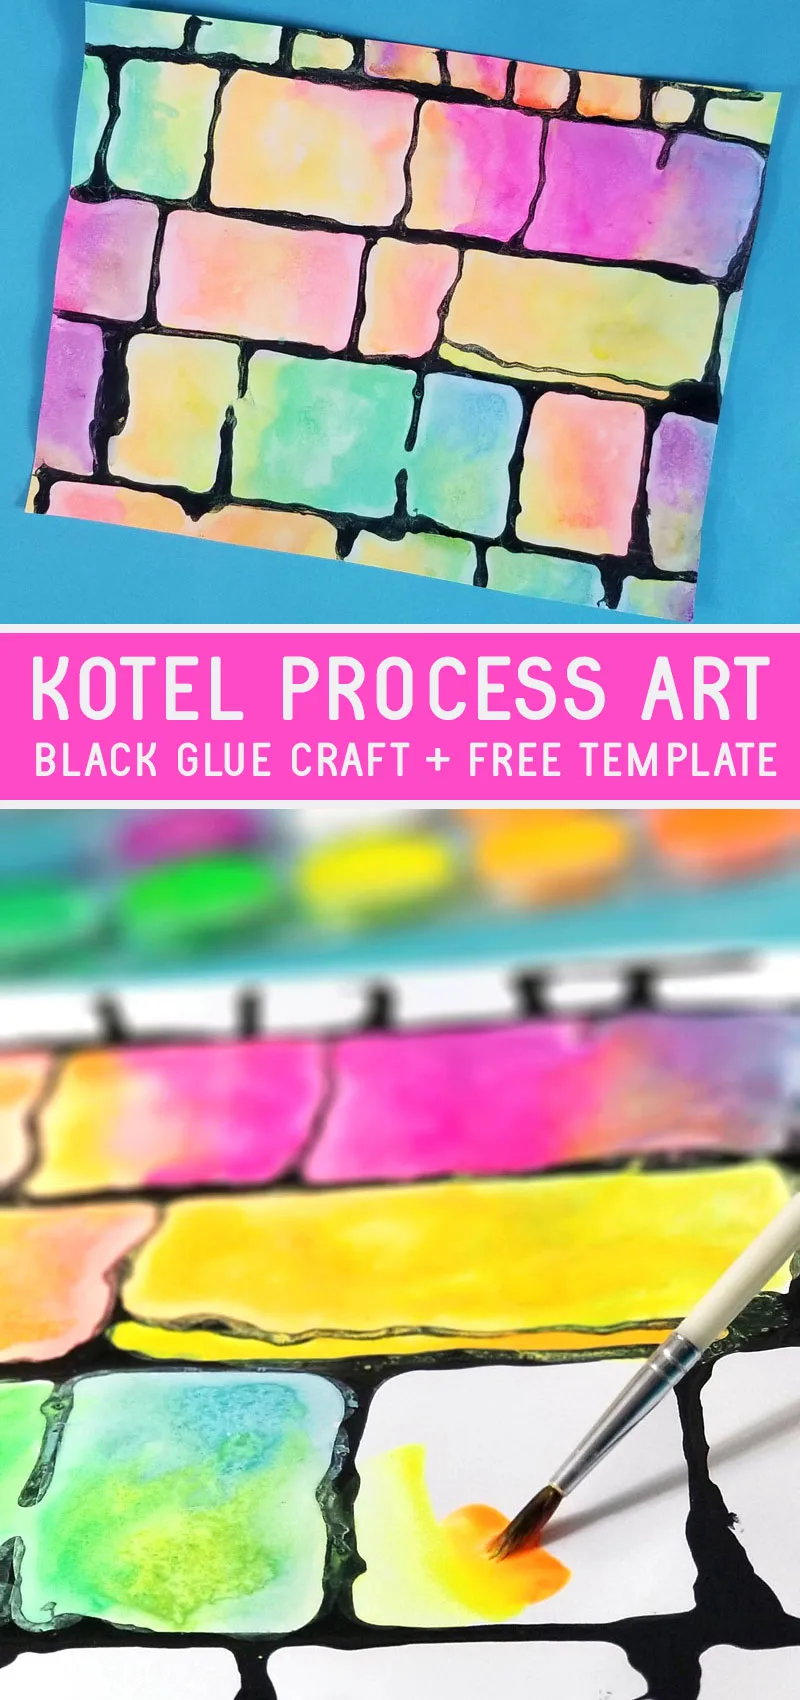 Make this gorgeous Kotel art project for kids and adults - great for Hebrew School and studying Israel and Independence Day! This beautiful black glue resist craft uses neon watercolor paints for a fun Jewish art project for kids. It makes a great Sukkah Decoration too.